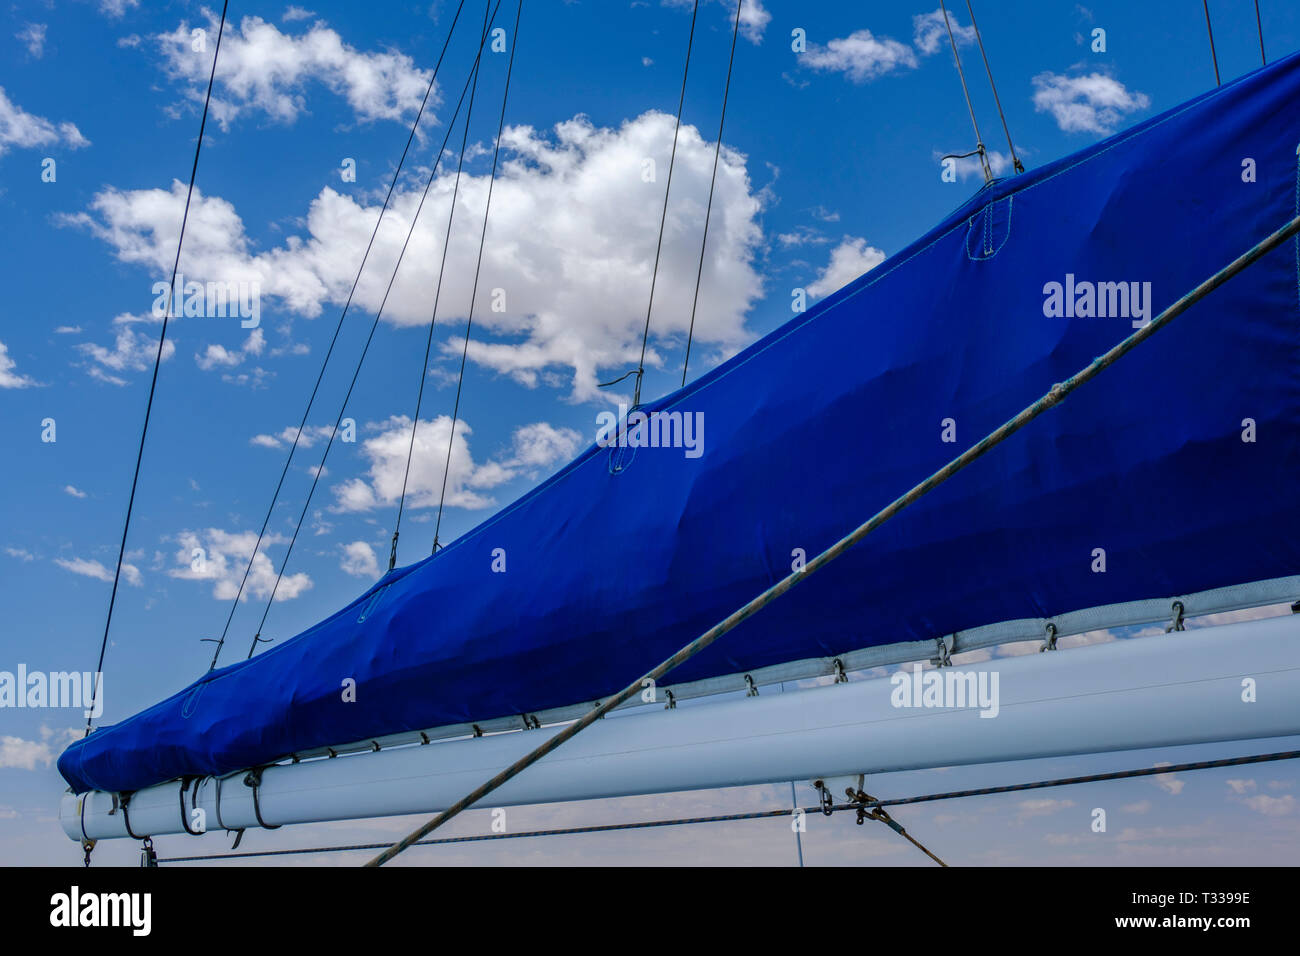 Beautiful bright blue canvas of furles sail against blue sky with white clouds Stock Photo